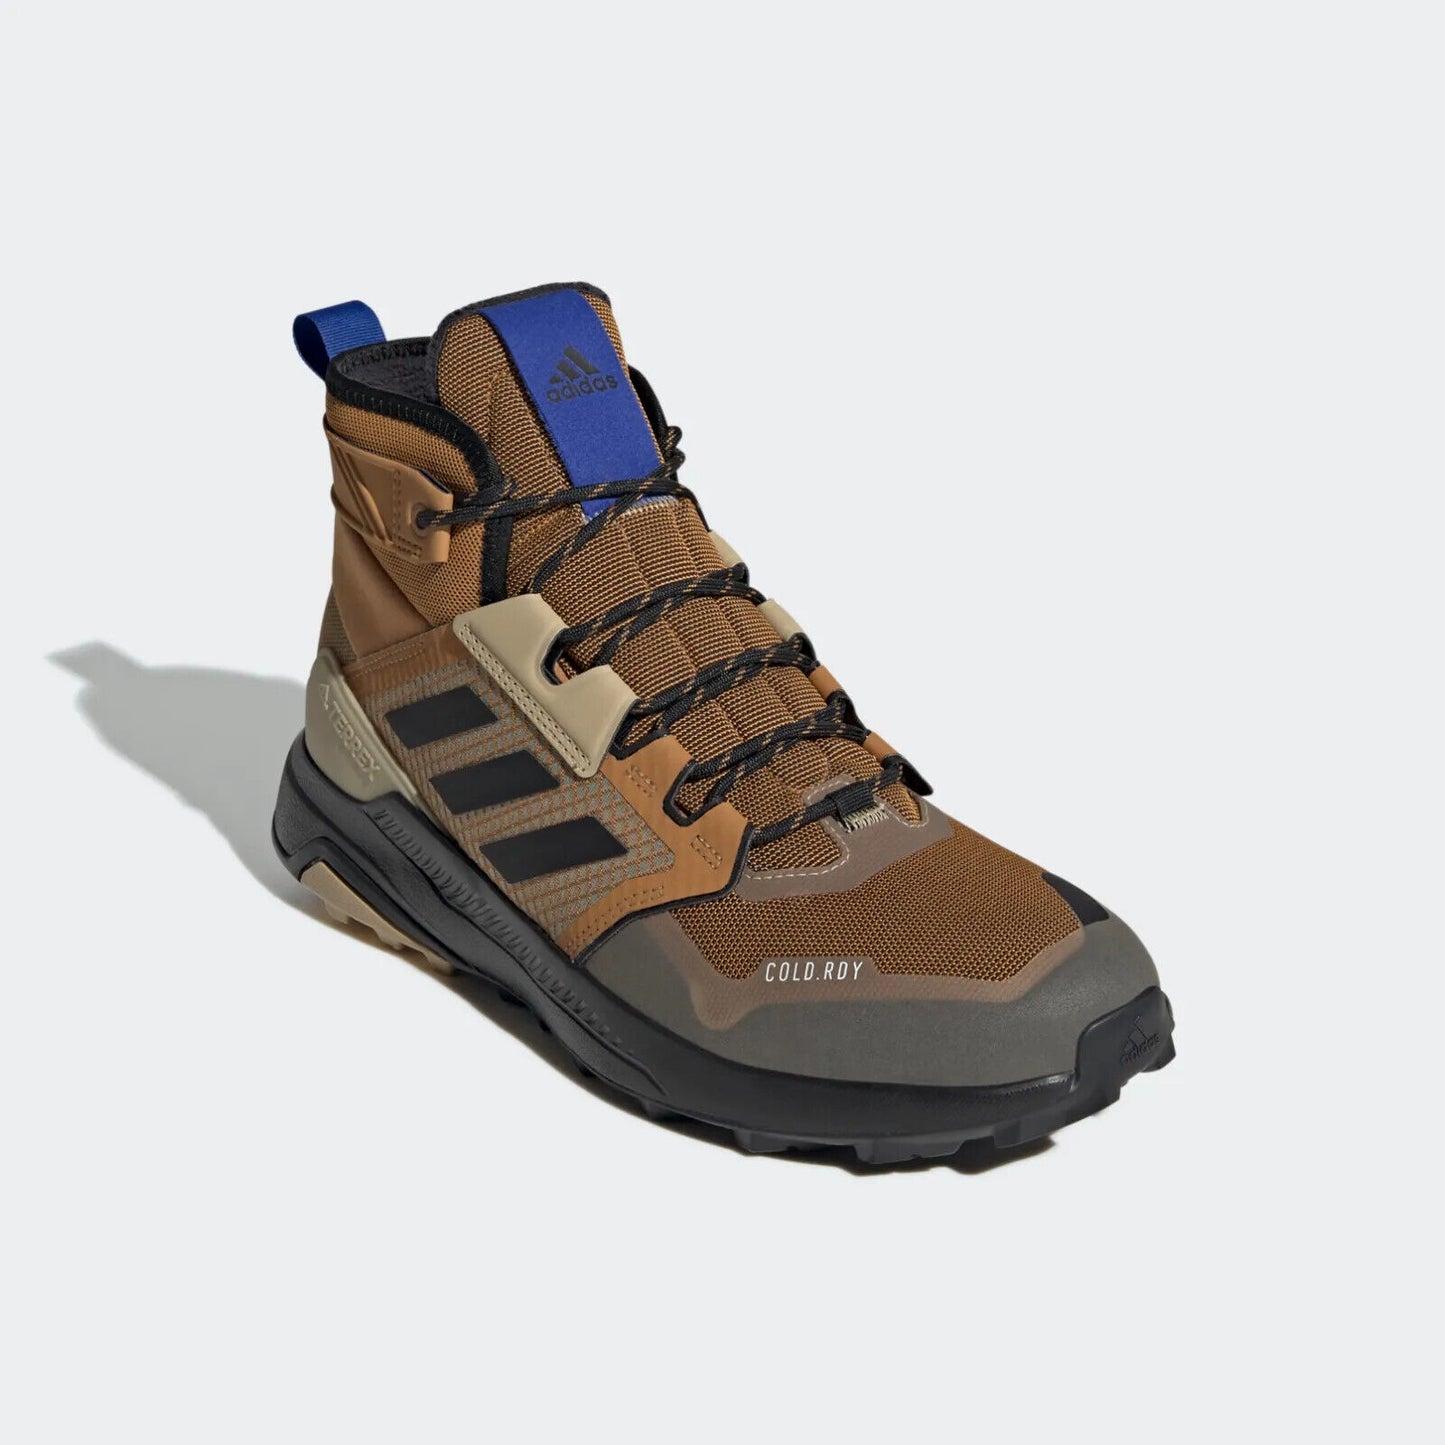 adidas Terrex Trailmaker Mid COLD.RDY Mens SIZE 9 9.5 10.5 Hiking Shoes Boots